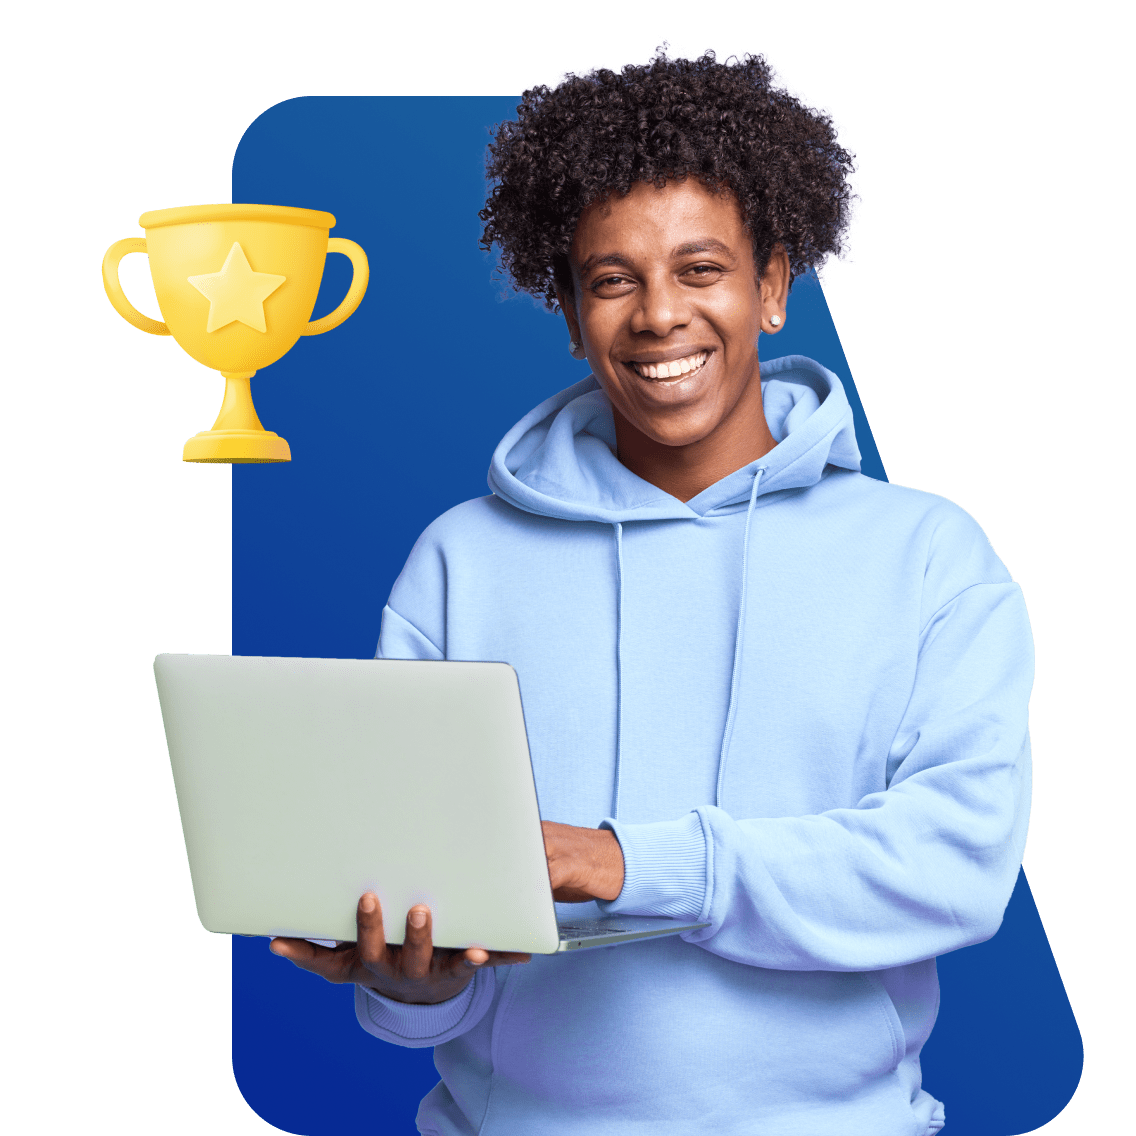 New Mexico Online Schools image 2 (name 1 Young Man Laptop Blue Hoodie Award)